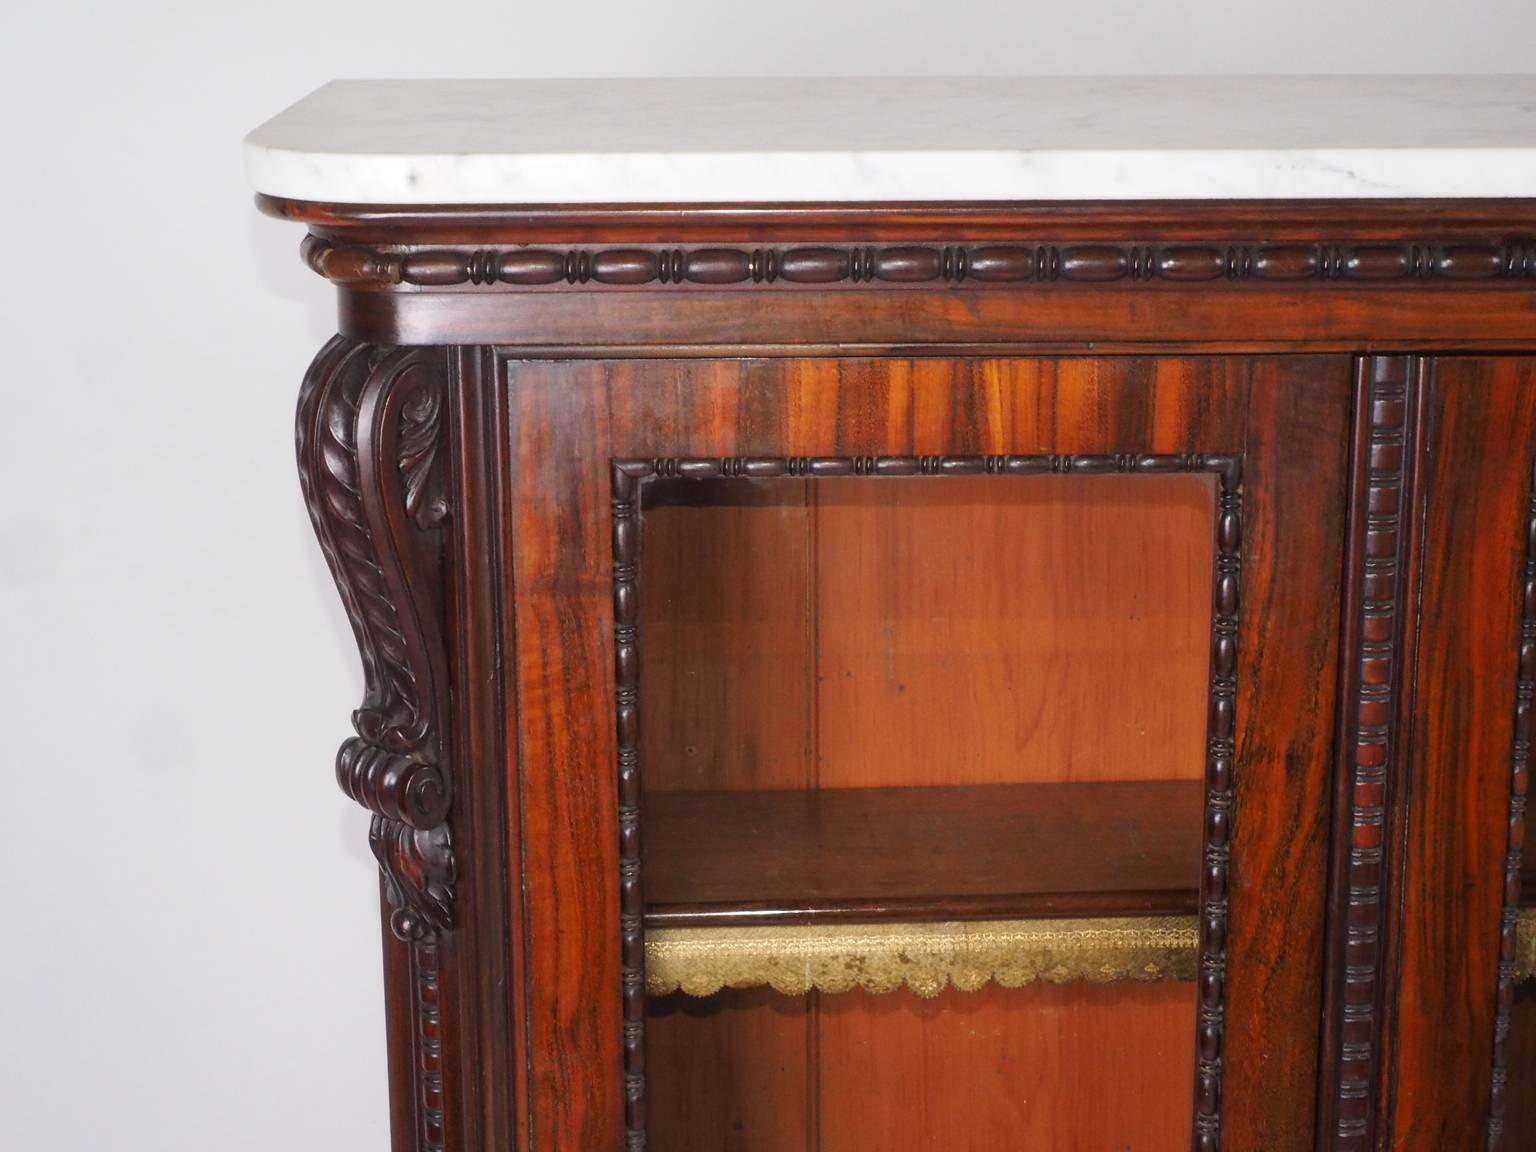 Small Bookcase or Display Cabinet in Goncalo Alves In Excellent Condition For Sale In Fremantle, W.Australia